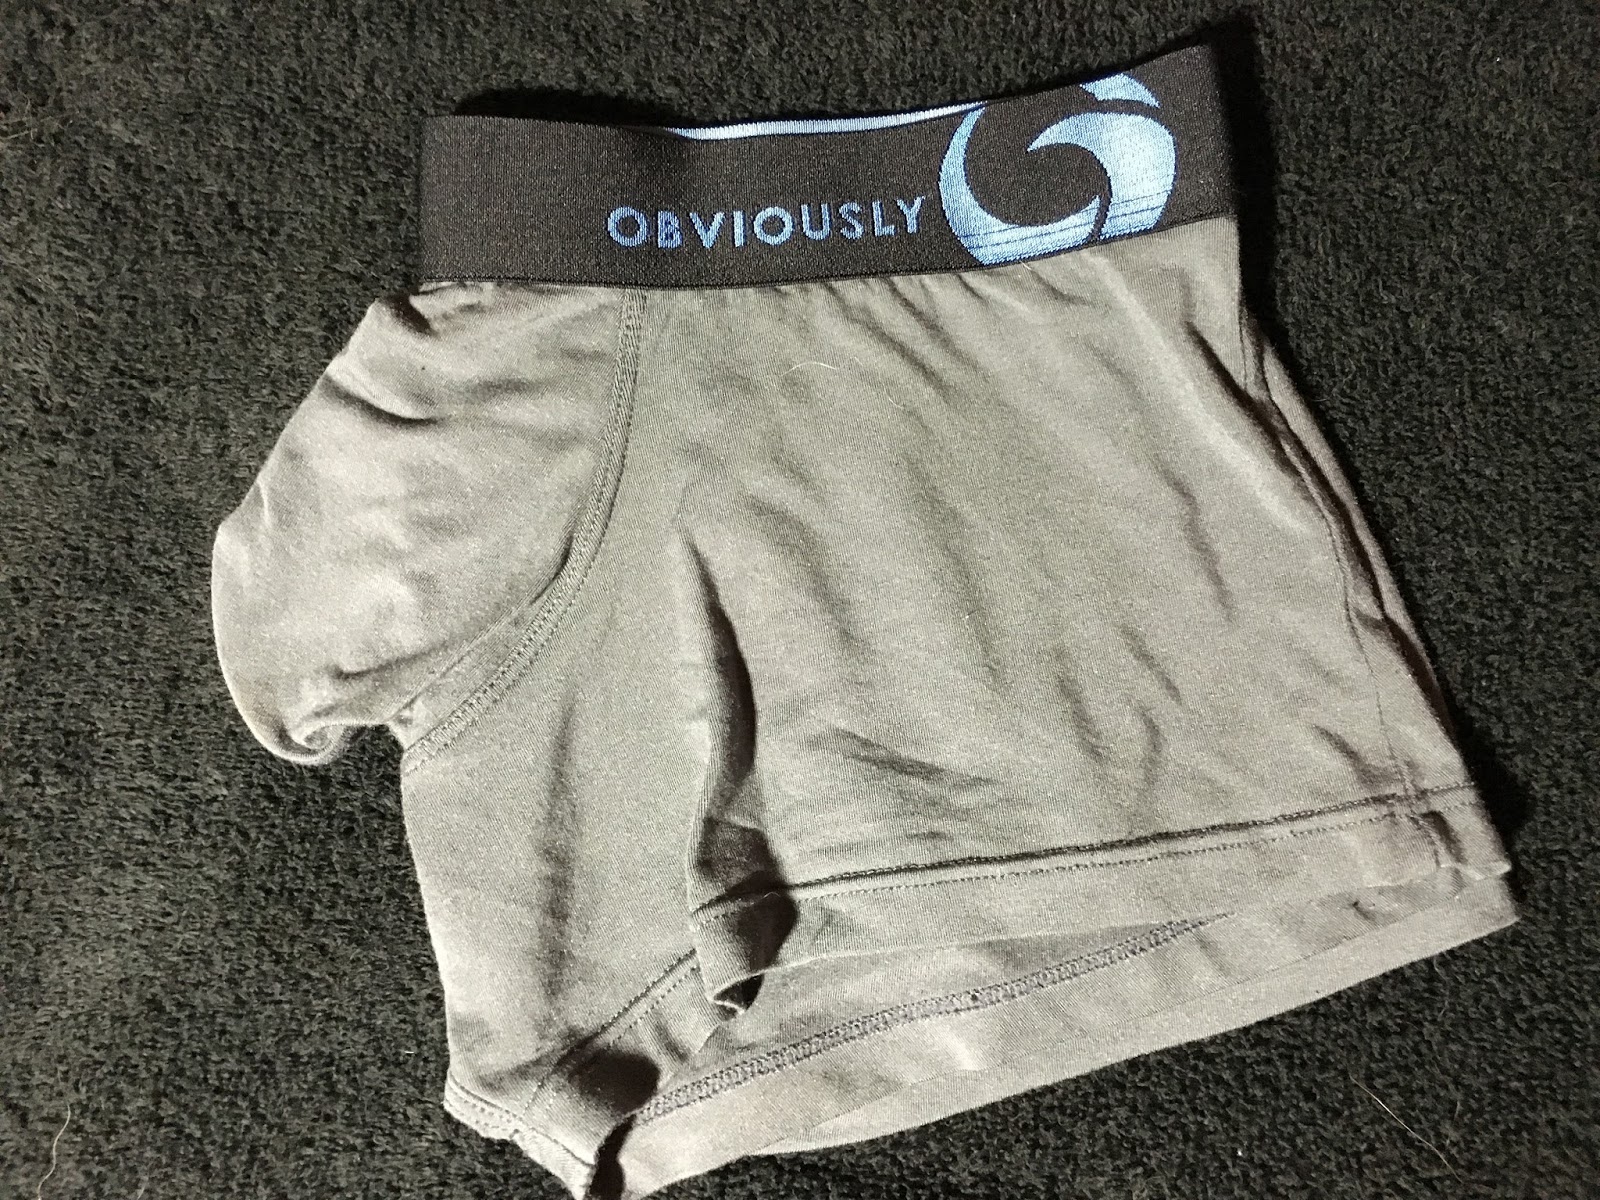 Well-Endowed Underwear Review: Obviously Essence AnatoFREE Hipster Trunk